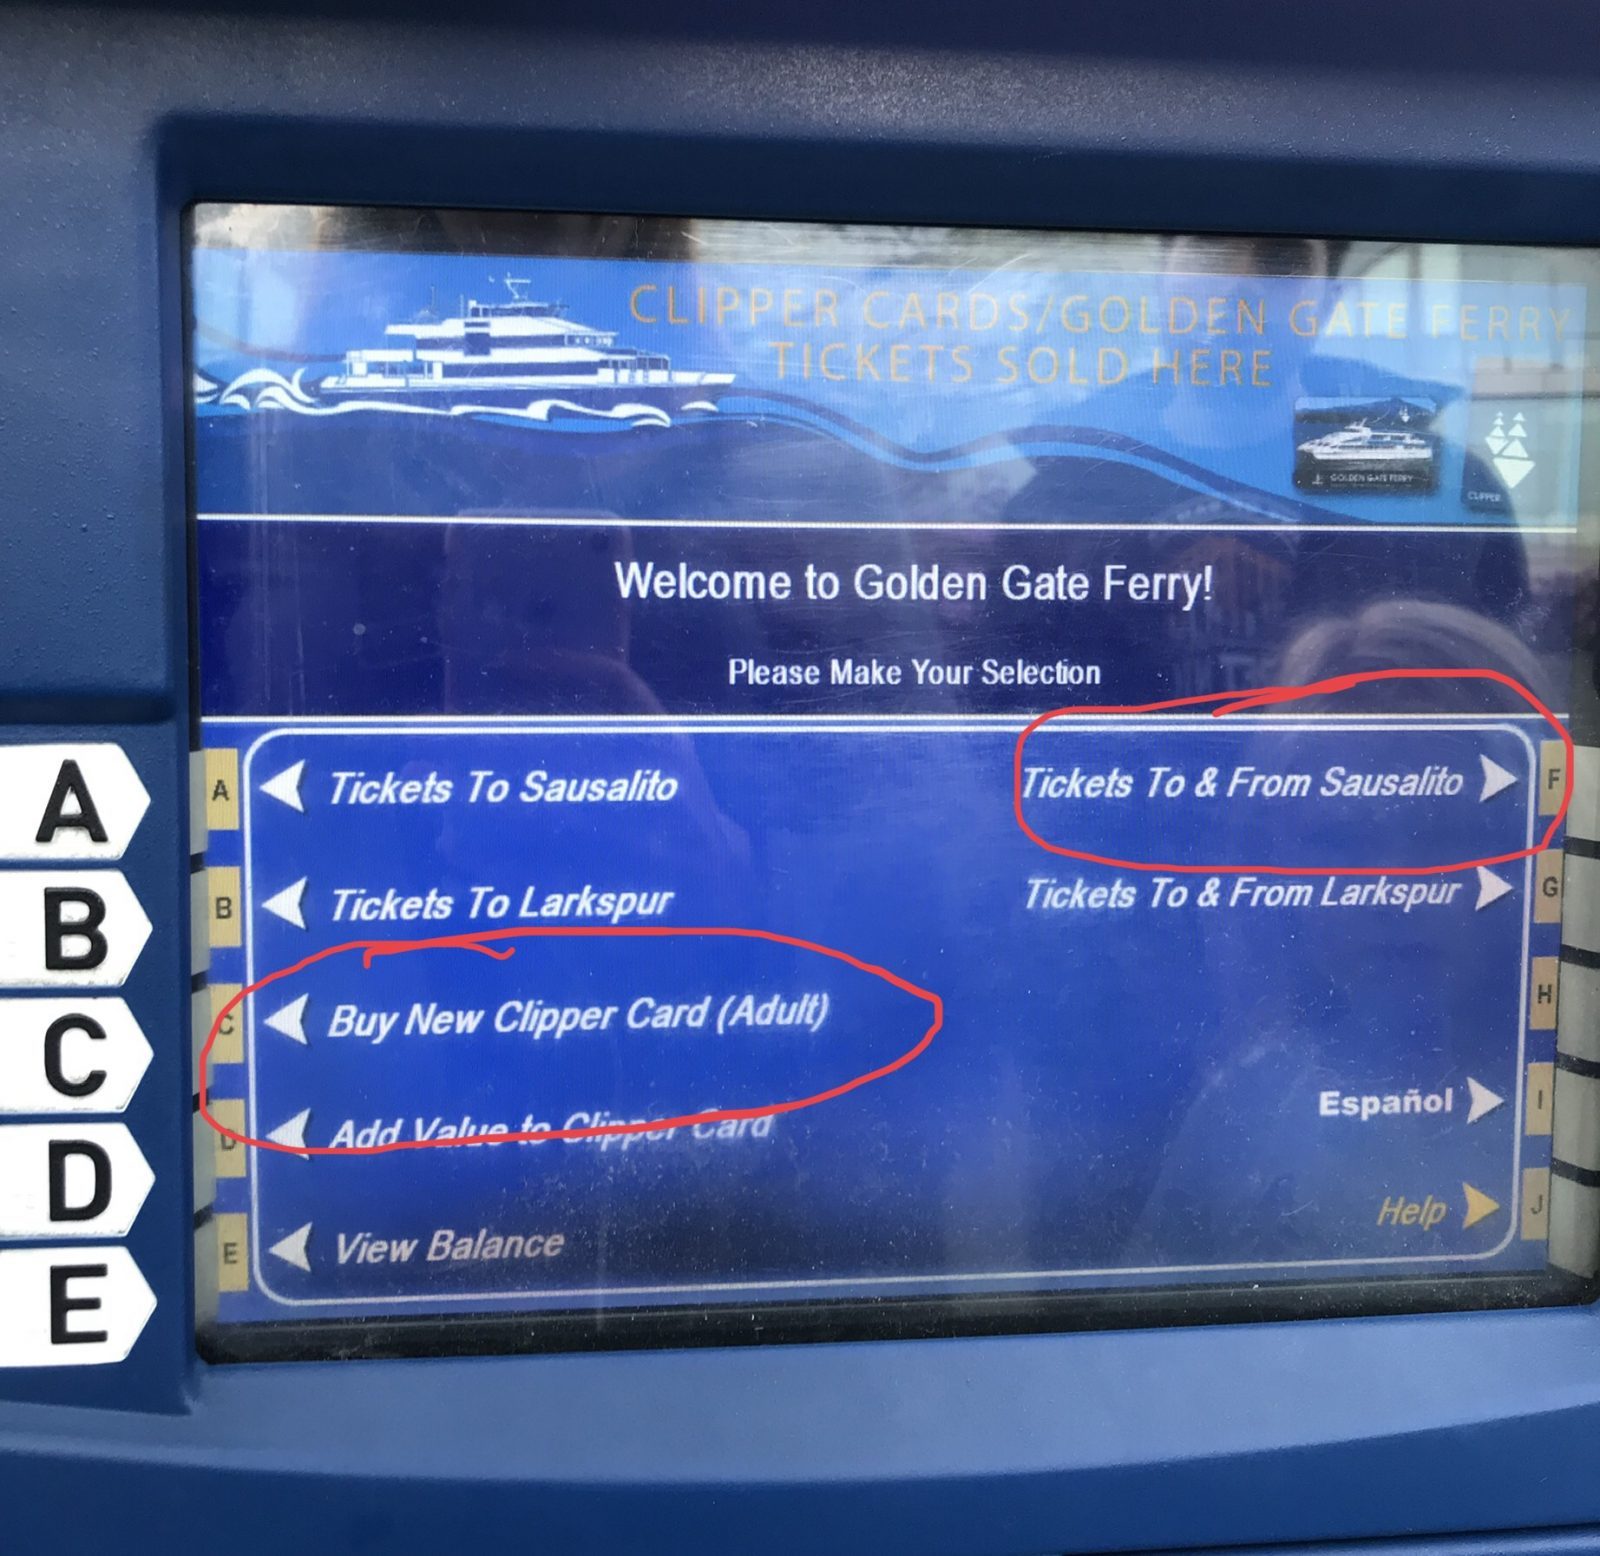 ticket options listed on the machine